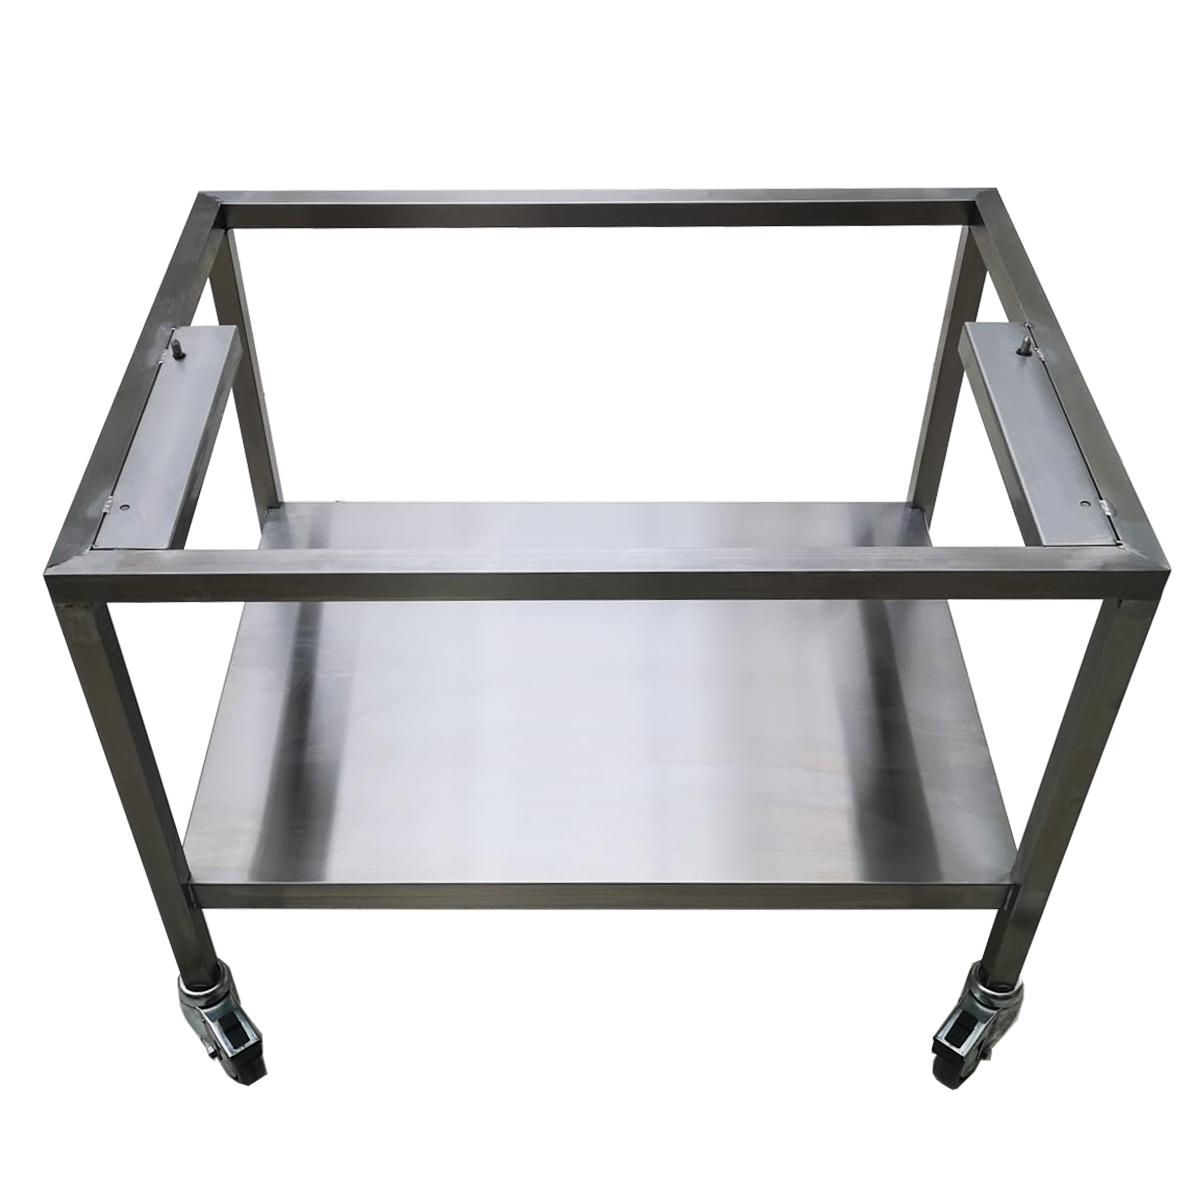 Cater-Fabs Mobile Combi Stand with Castors for the iCombi 6 & 10 Deck 1/1Gn Ovens